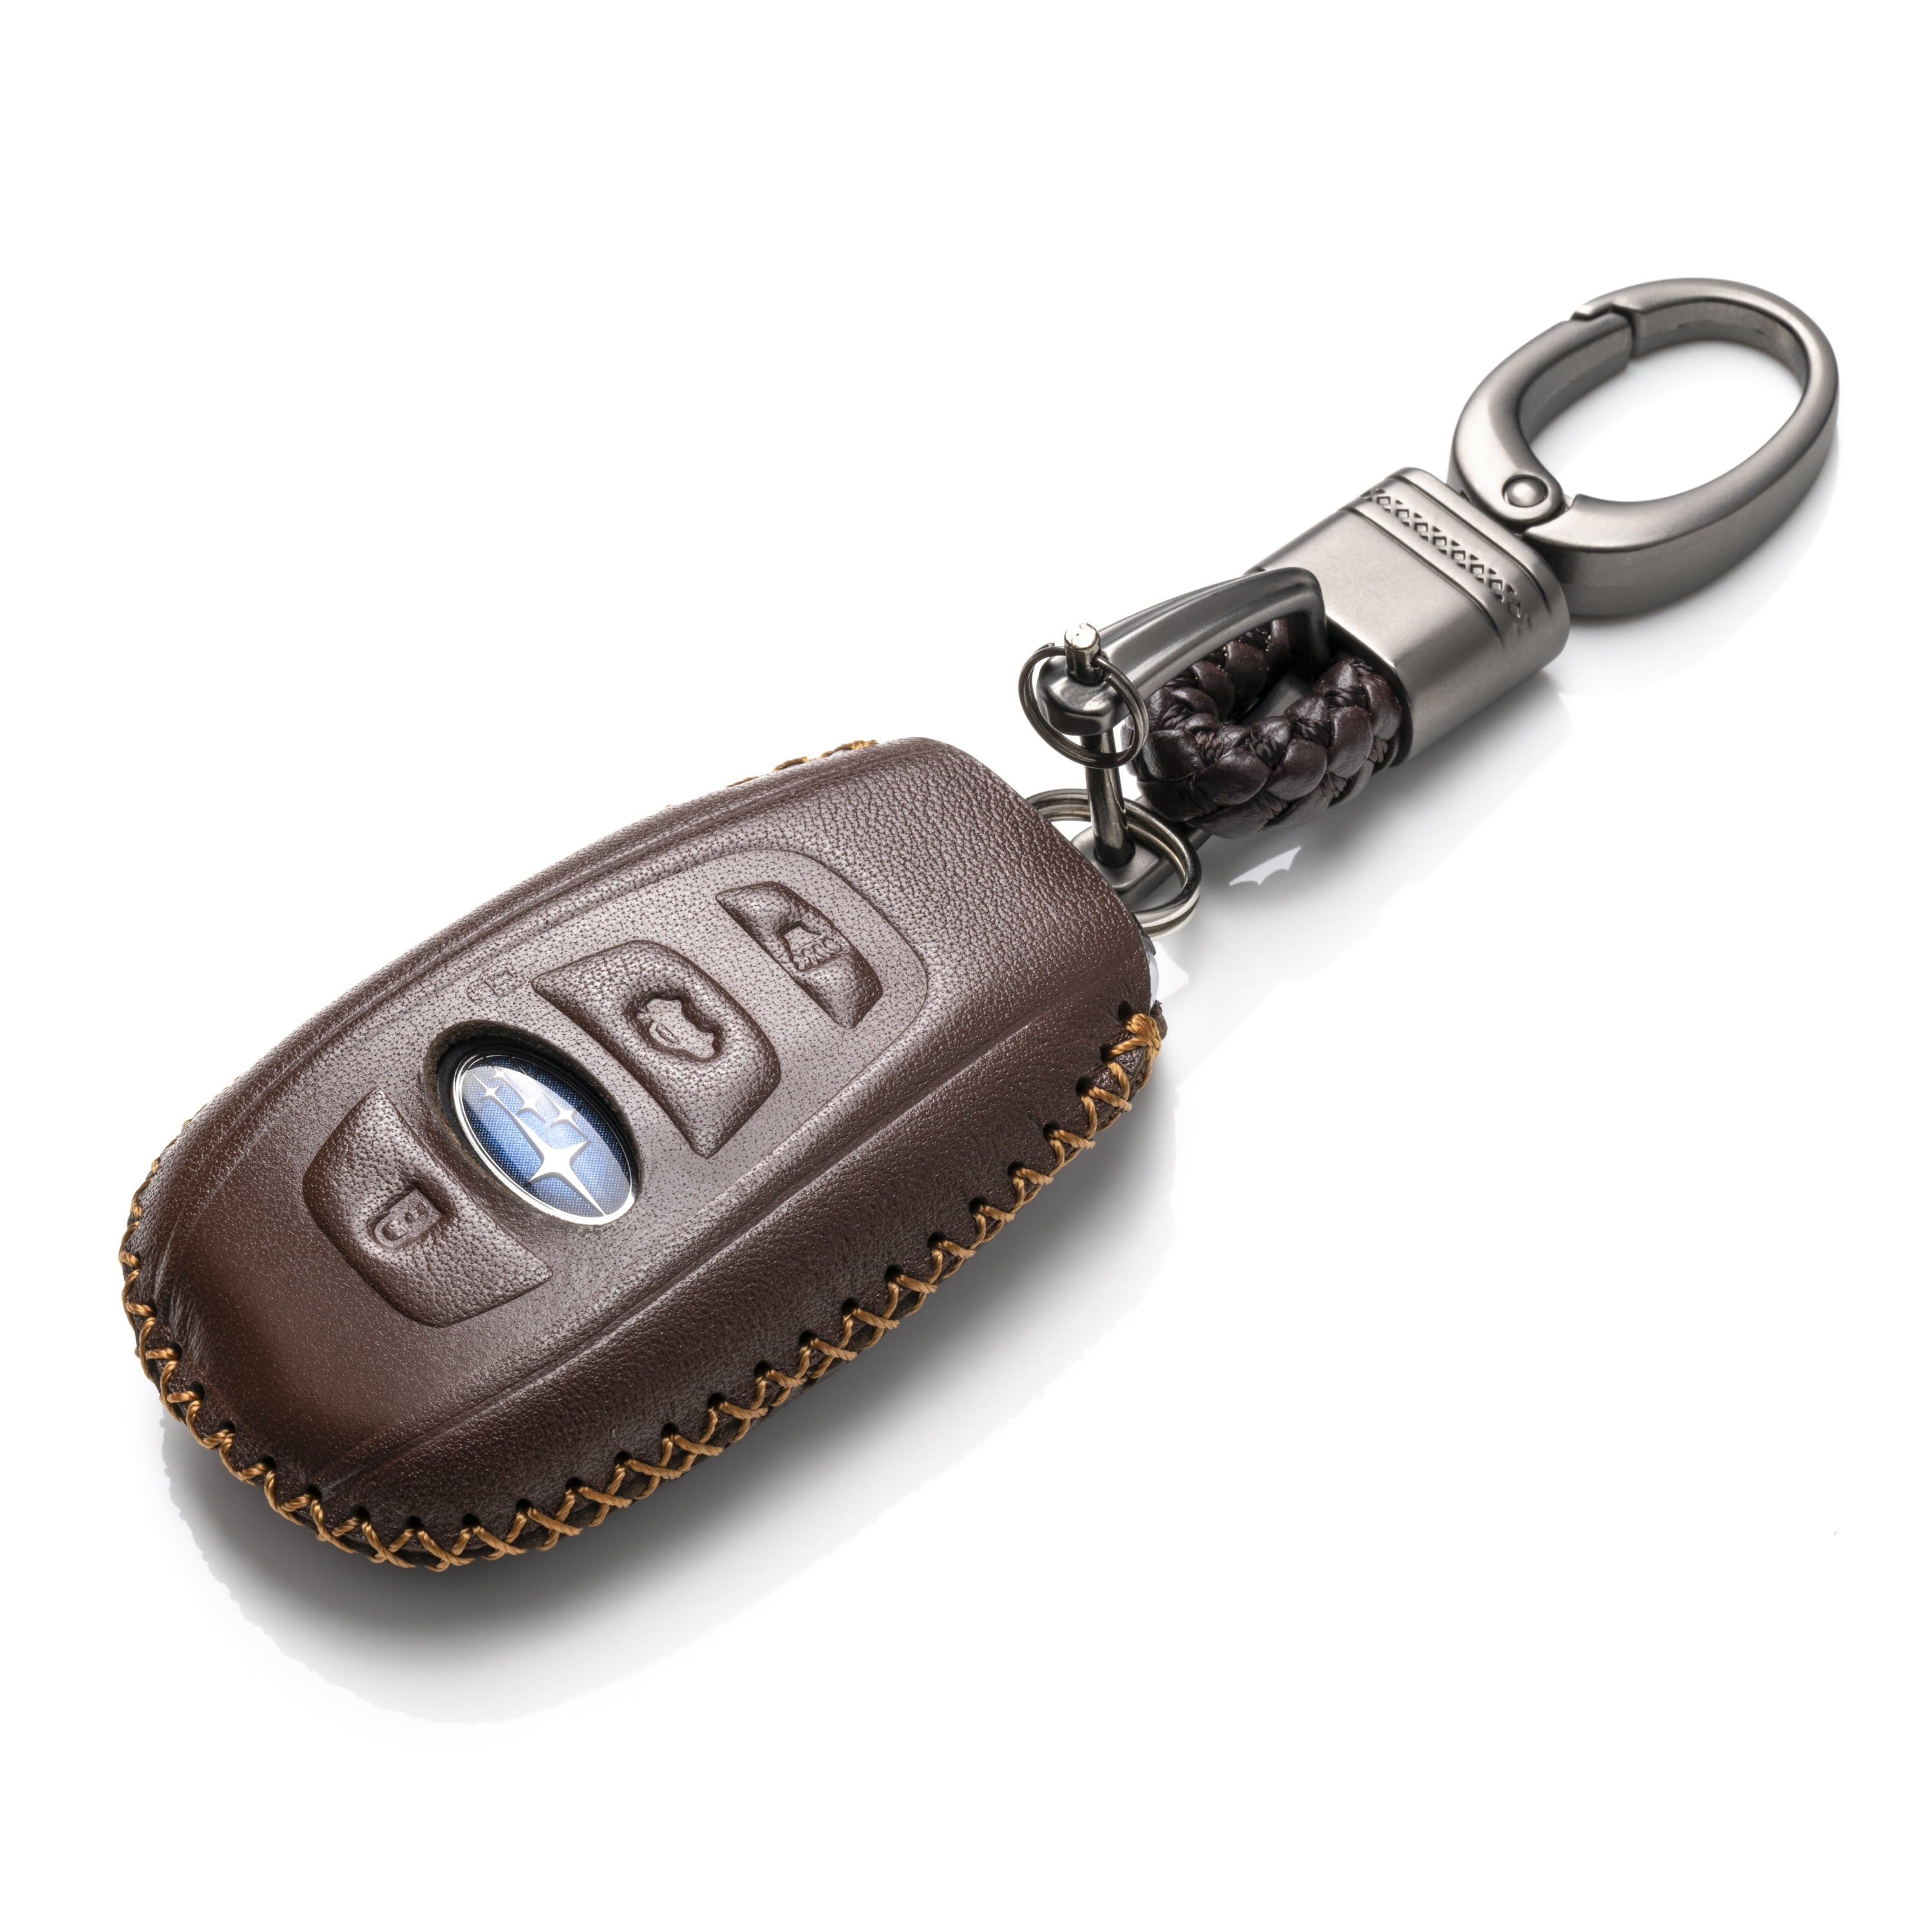 Tukellen Compatible with Subaru Leather Key Fob Cover with Keychain Fit For  WRX Outback Ascent Forester Crosstrek Legacy Impreza Smart Remote, Genuine